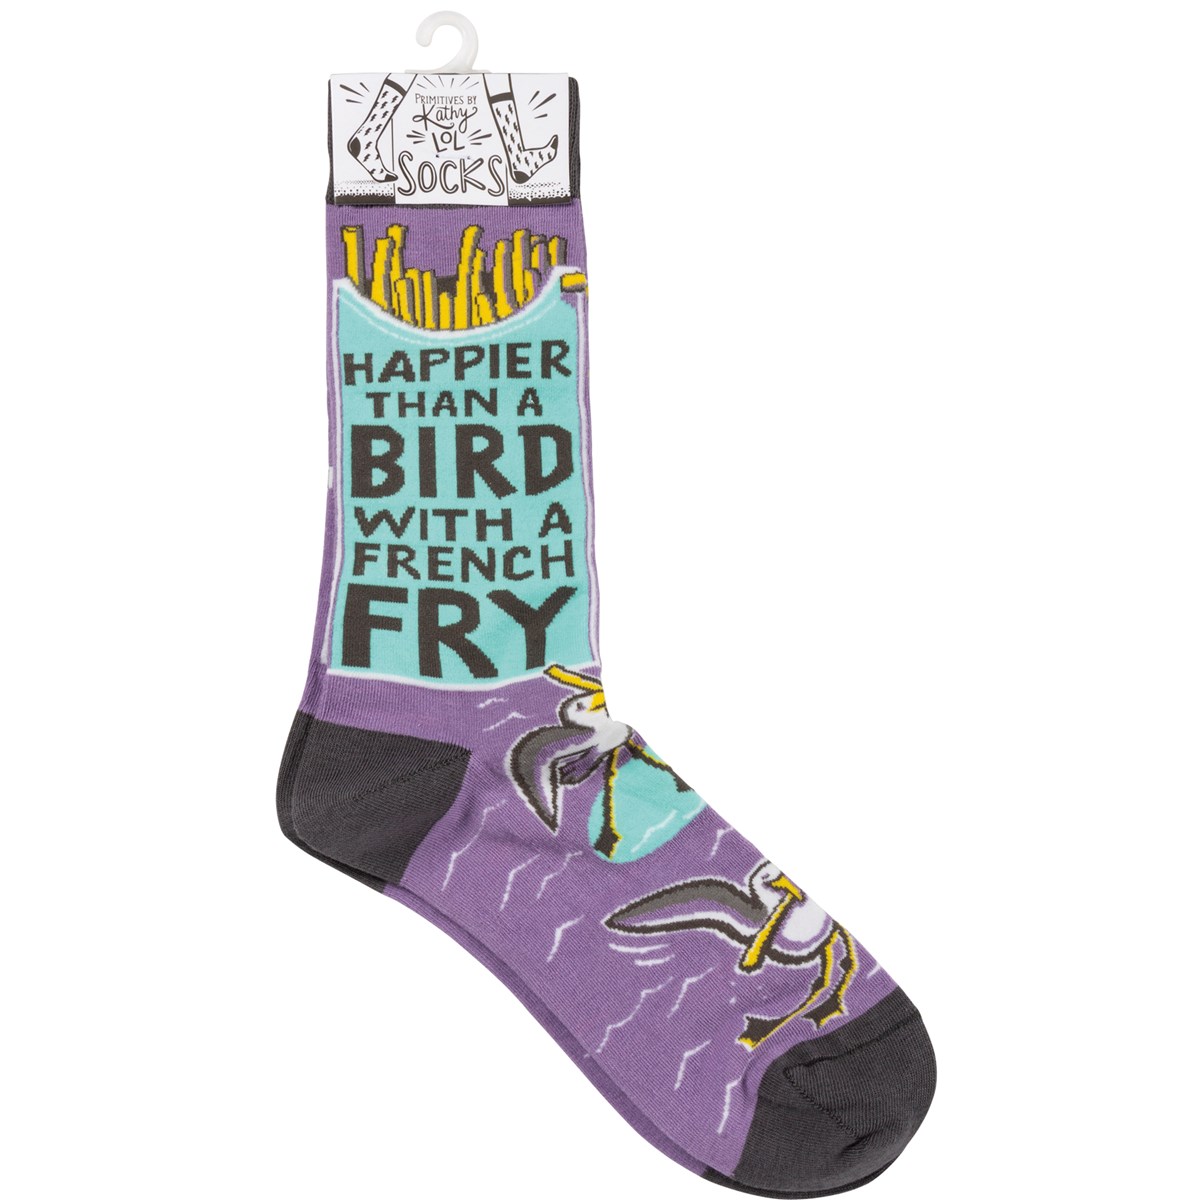 Happier Than A Bird With A French Fry Socks - Cotton, Nylon, Spandex